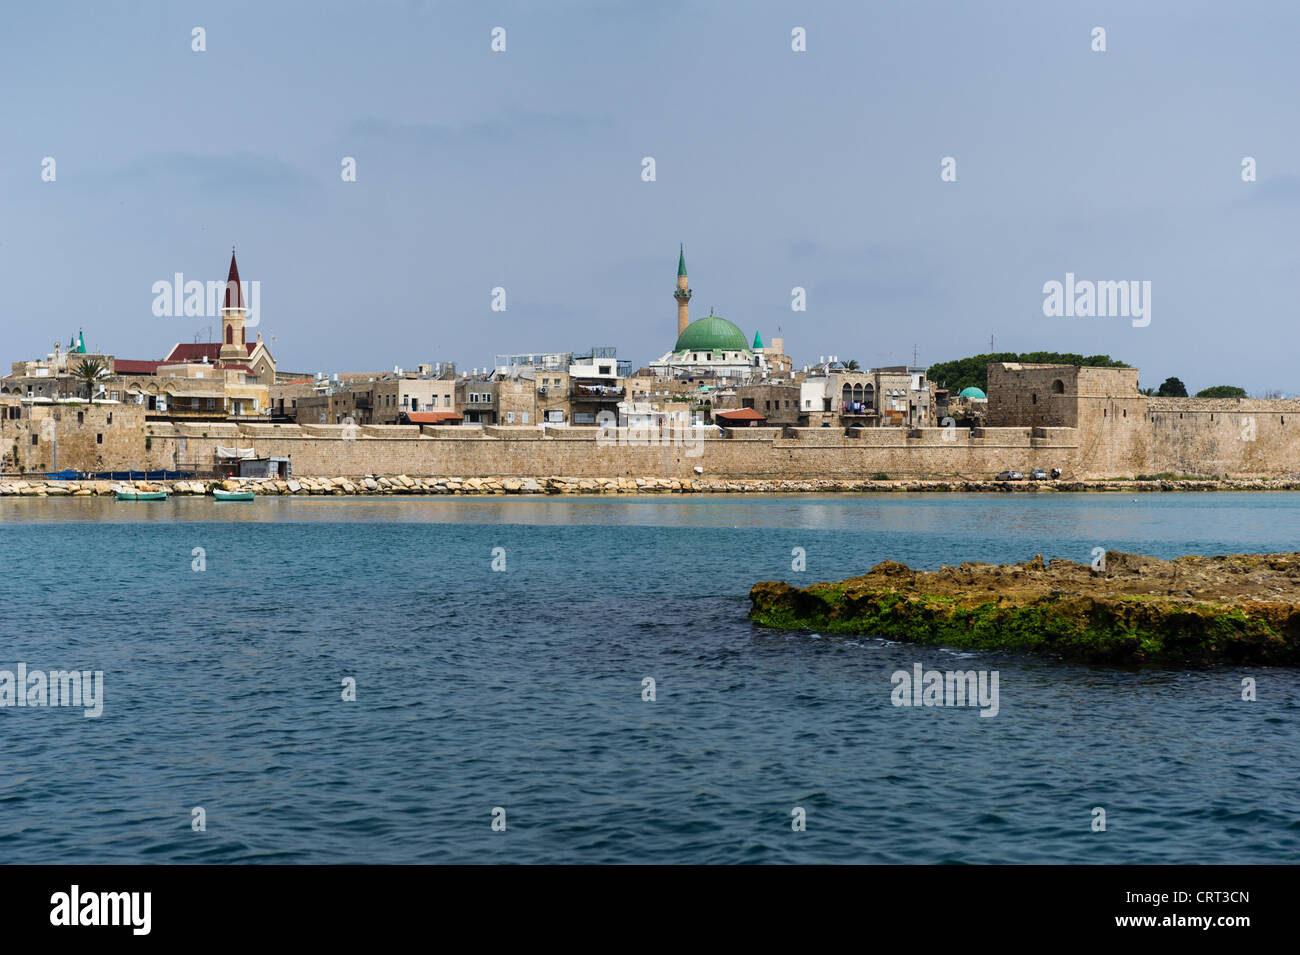 View on the ancient walls, houses and mosque in old town of Akko, Israel Stock Photo